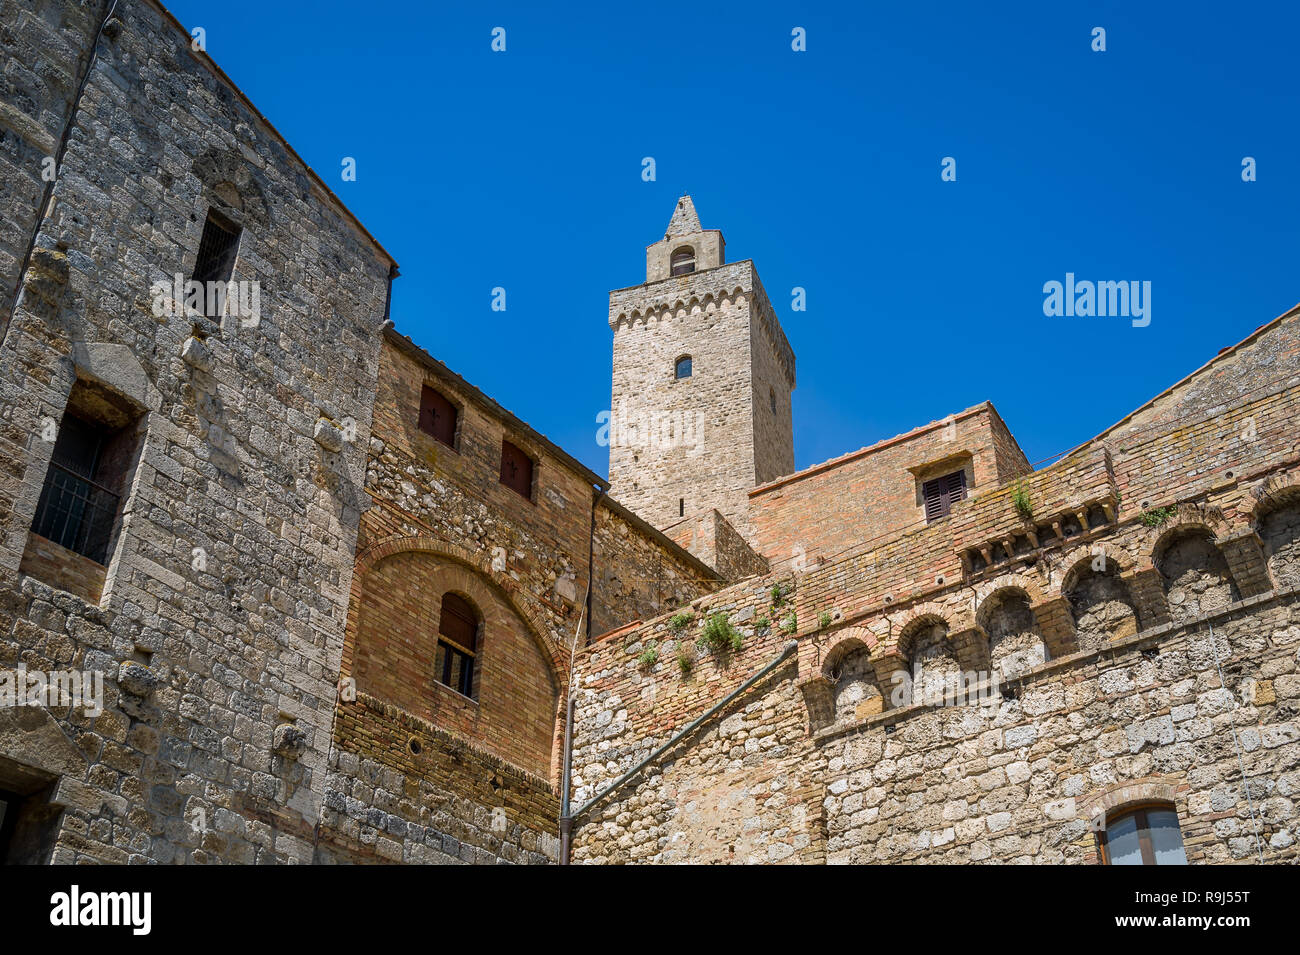 Medieval fortress of San Gimignano Ancient walls and tower view. Toscana region, Italy. Stock Photo